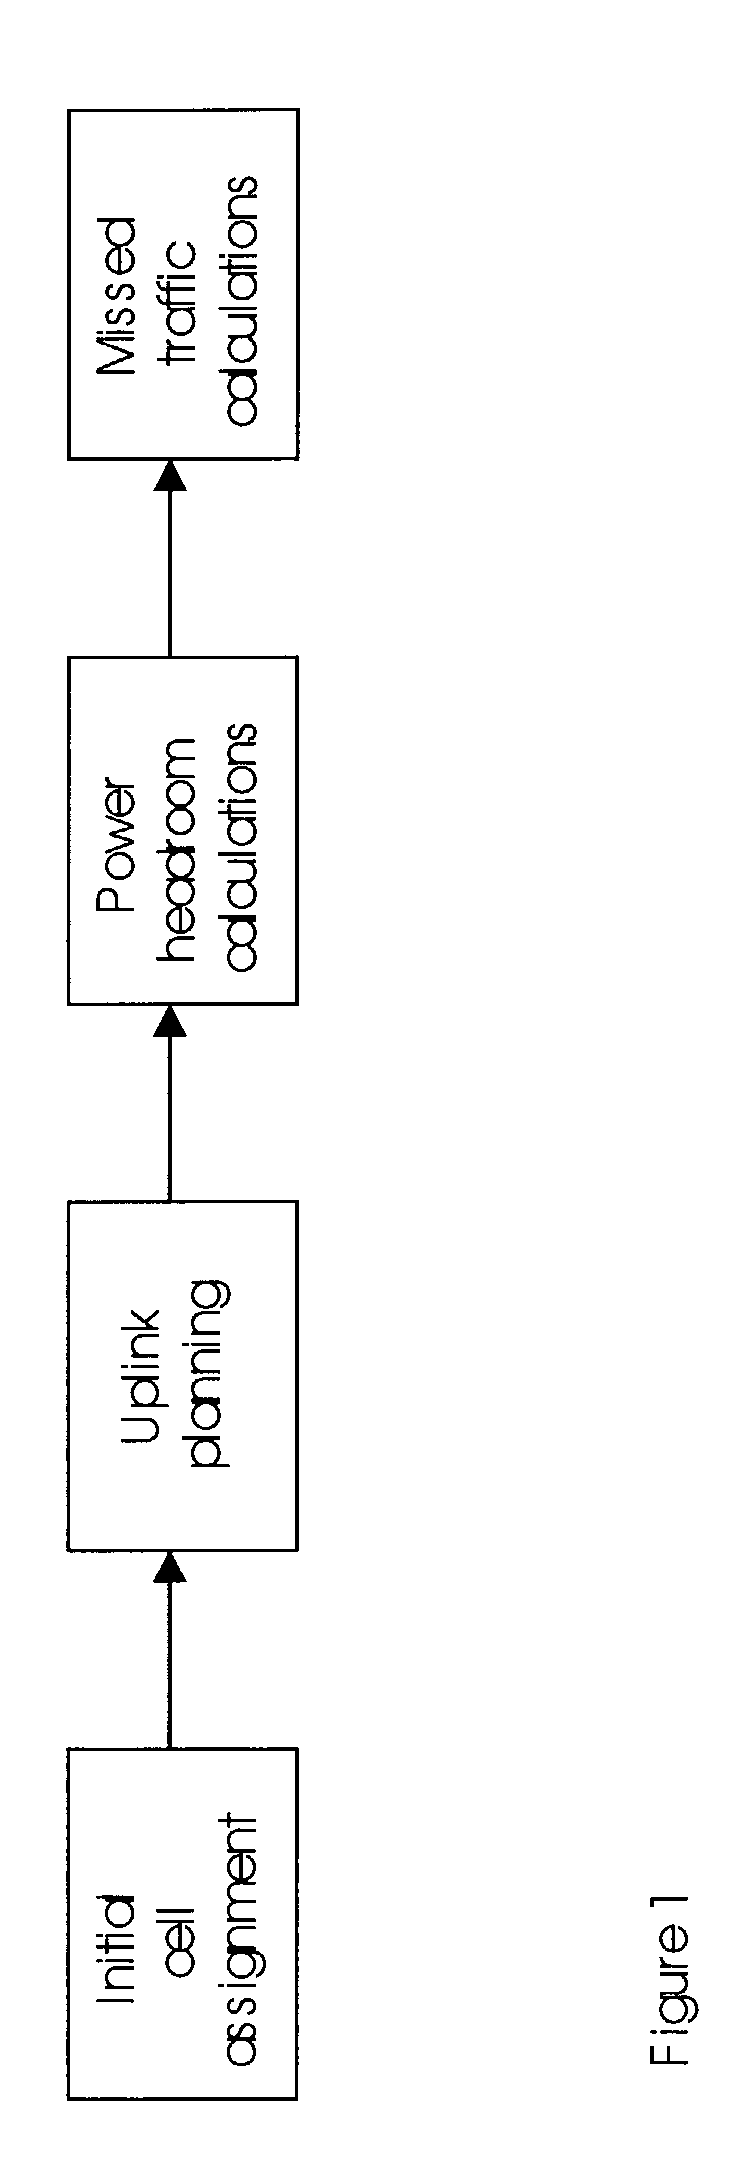 Method and system for planning and evaluation of CDMA radio networks